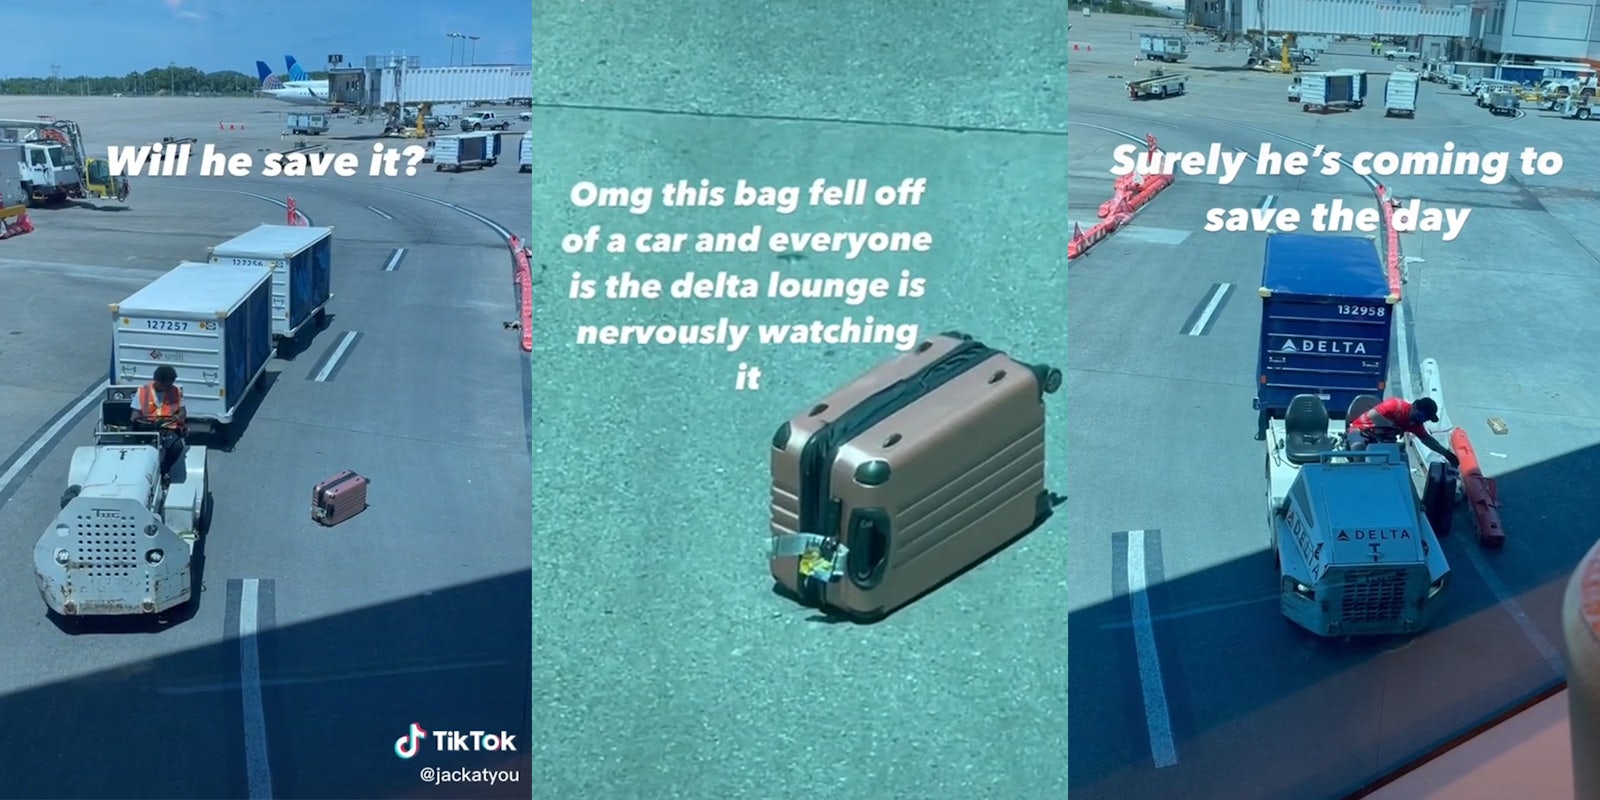 airline employee on tram looking at luggage in lane with caption 'will he save it?' (l) bag on ground with caption 'omg this bag fell off of a car and everyone is the delta lounge is nervously watching it' (c) delta employee reaching over to bag with caption 'surely he's coming to save the day' (r)